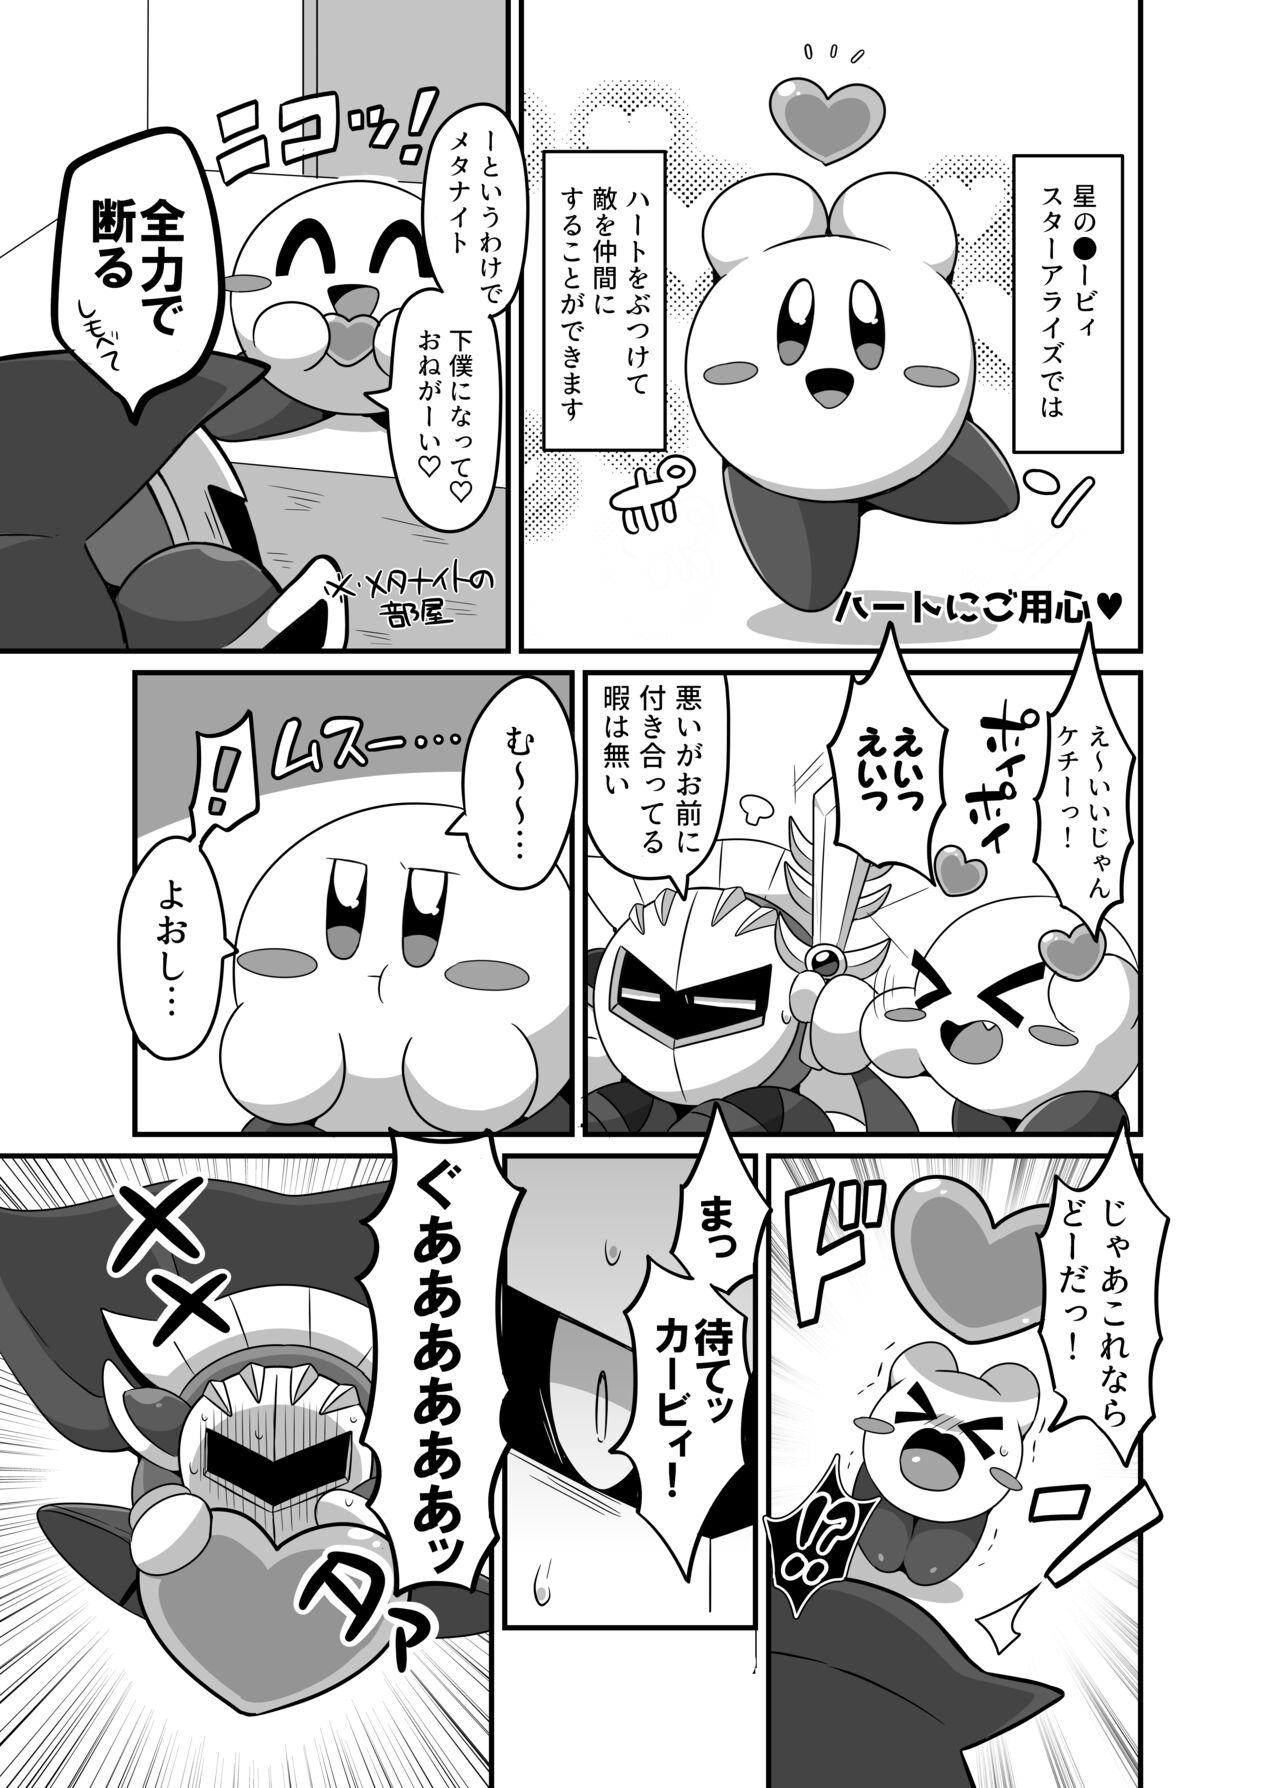 Real Amatuer Porn I Want to Do XXX Even For Spheres! - Kirby Reality - Page 7